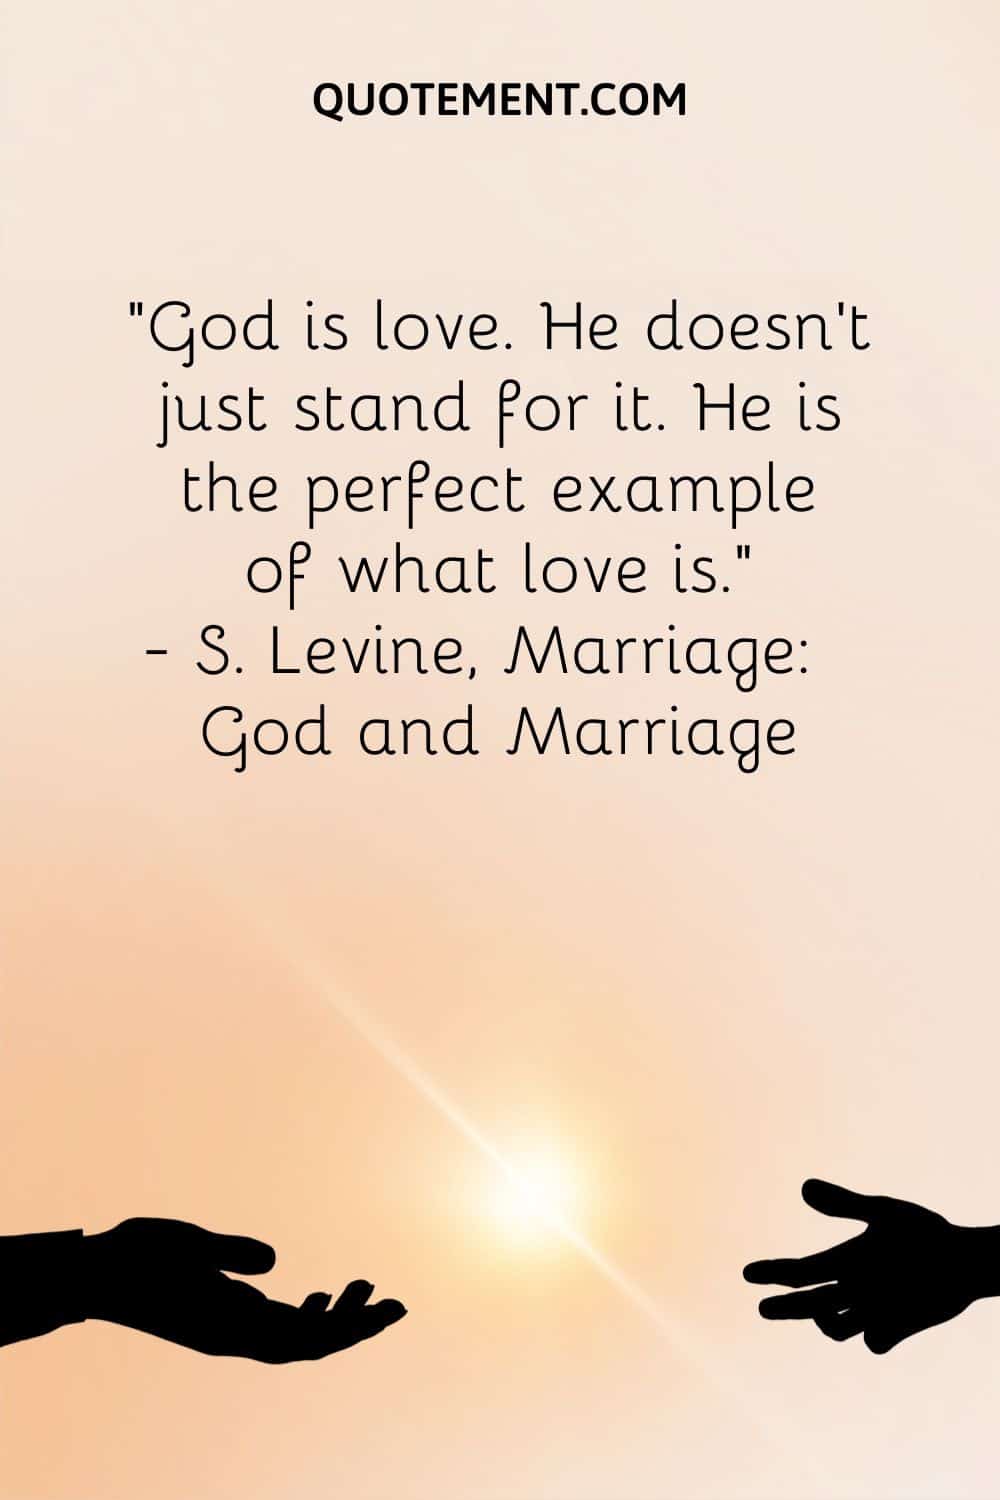 “God is love. He doesn’t just stand for it. He is the perfect example of what love is.” ― S. Levine, Marriage God and Marriage